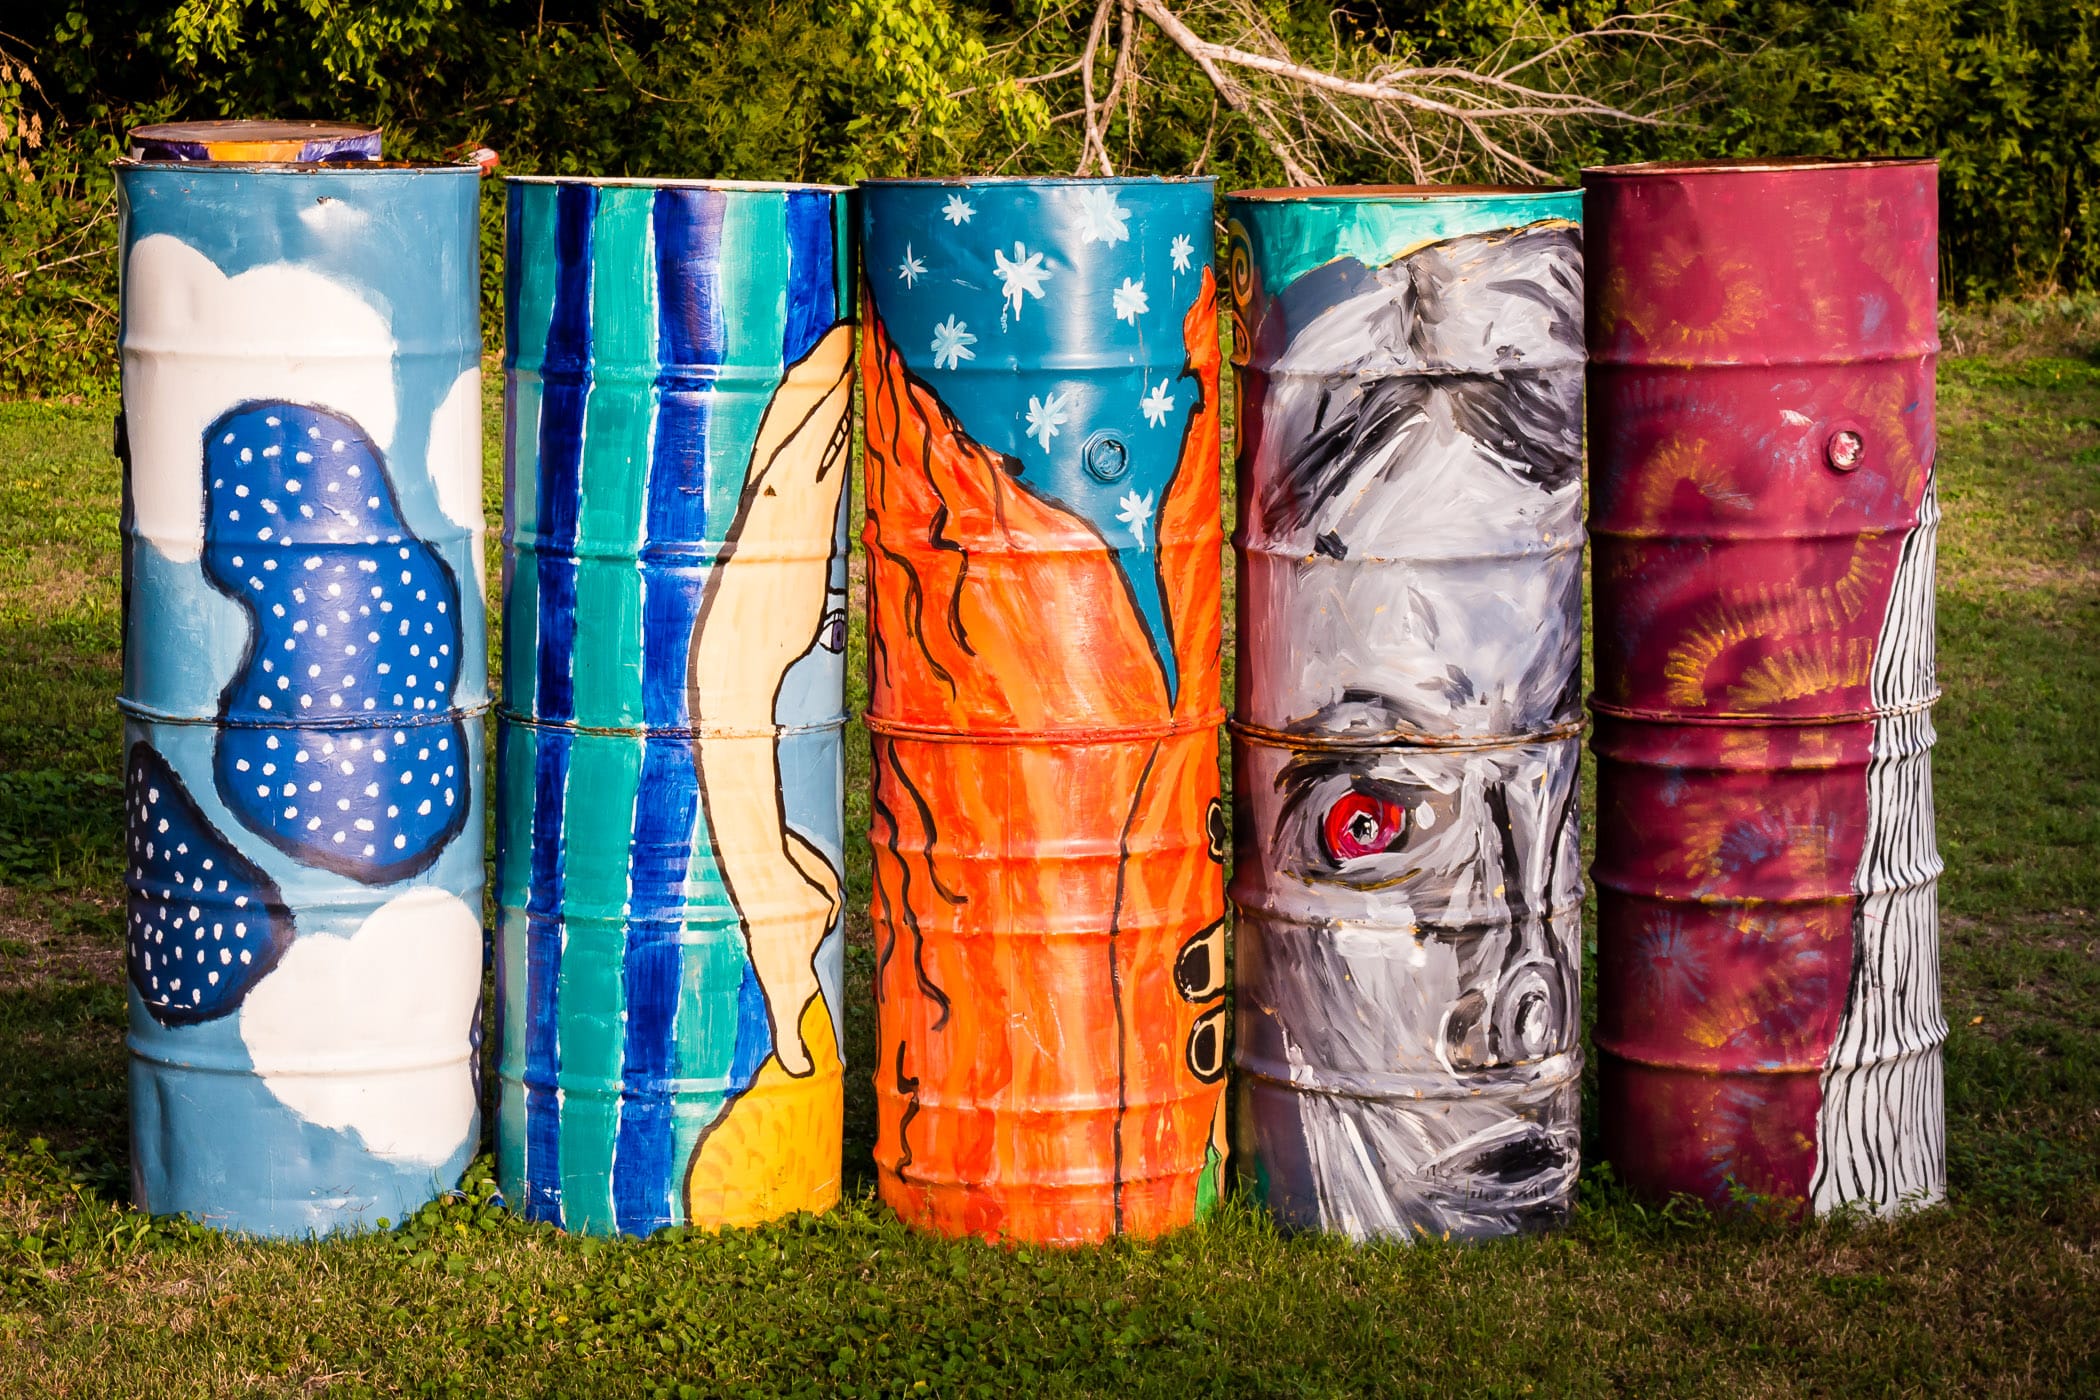 55-gallon drums welded together and painted to make artwork in a Waxahachie, Texas, park.